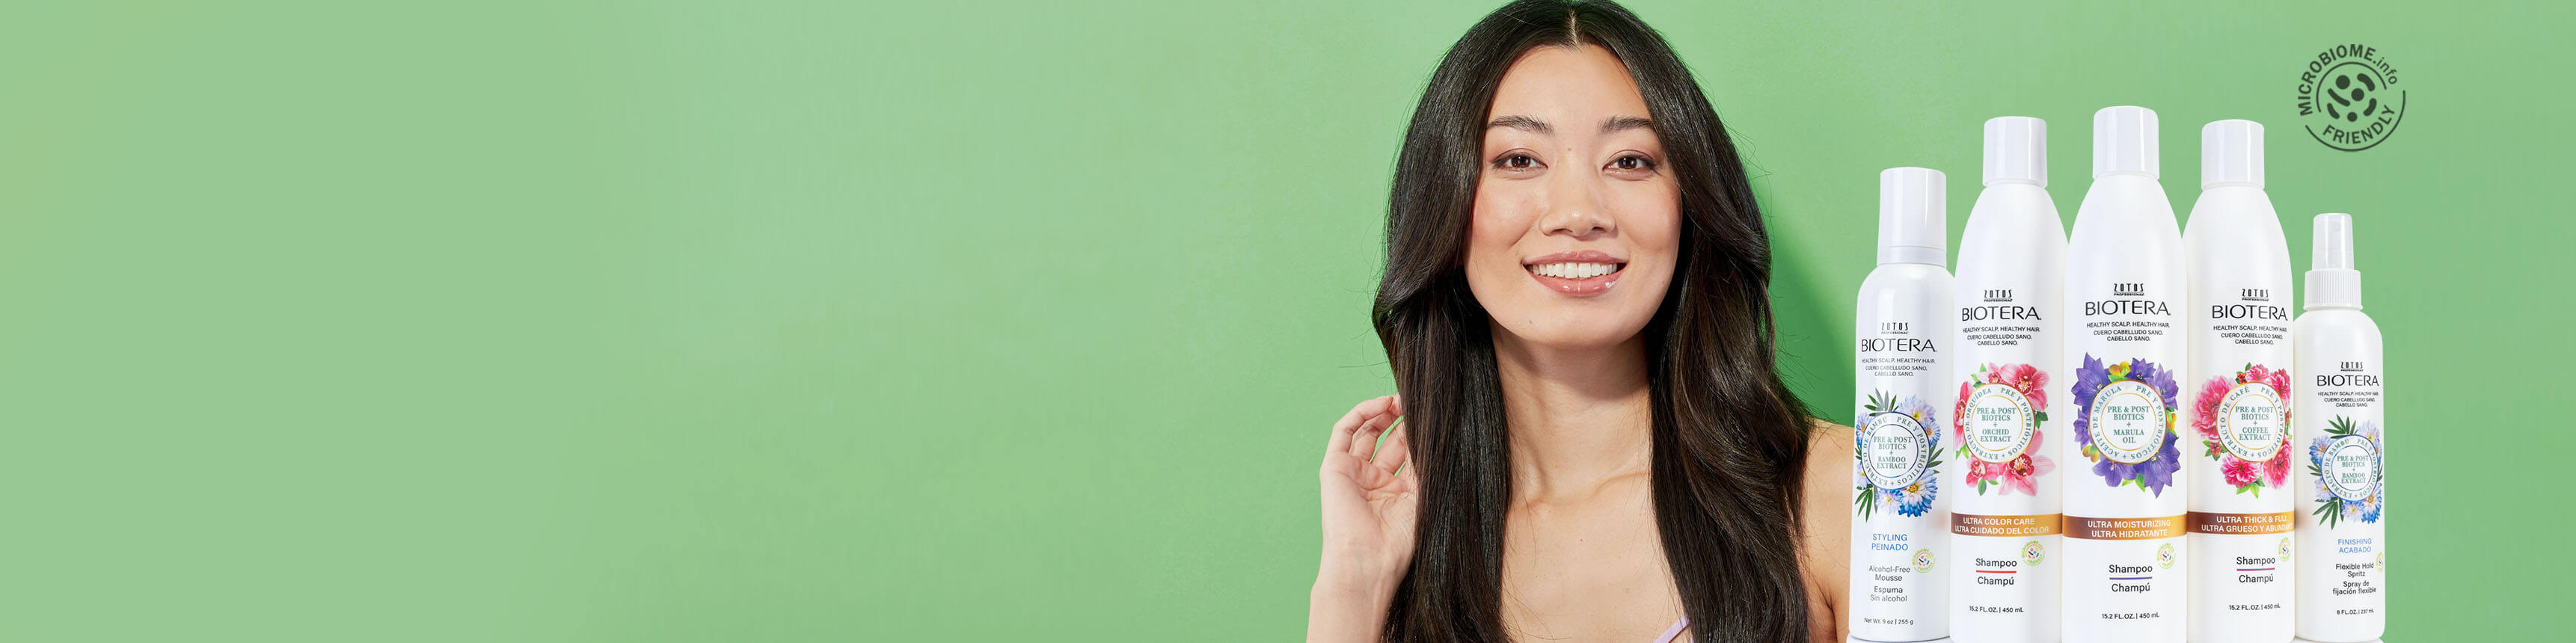 black hair model with hair products on green background